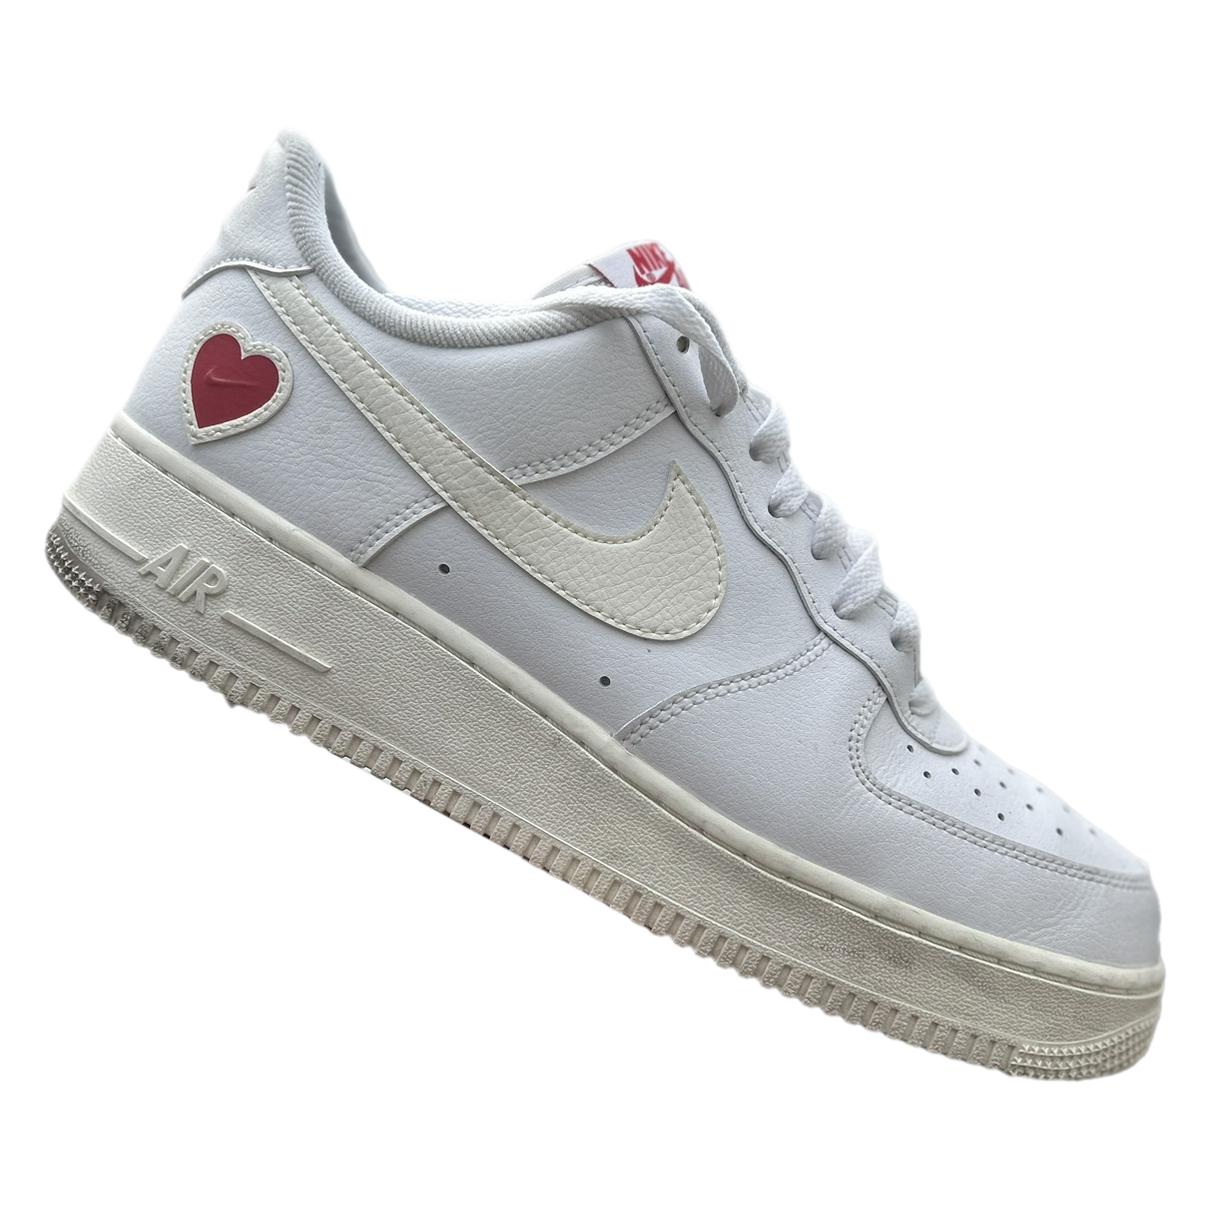 Air force 1 leather low trainers Nike White size 43 EU in Leather